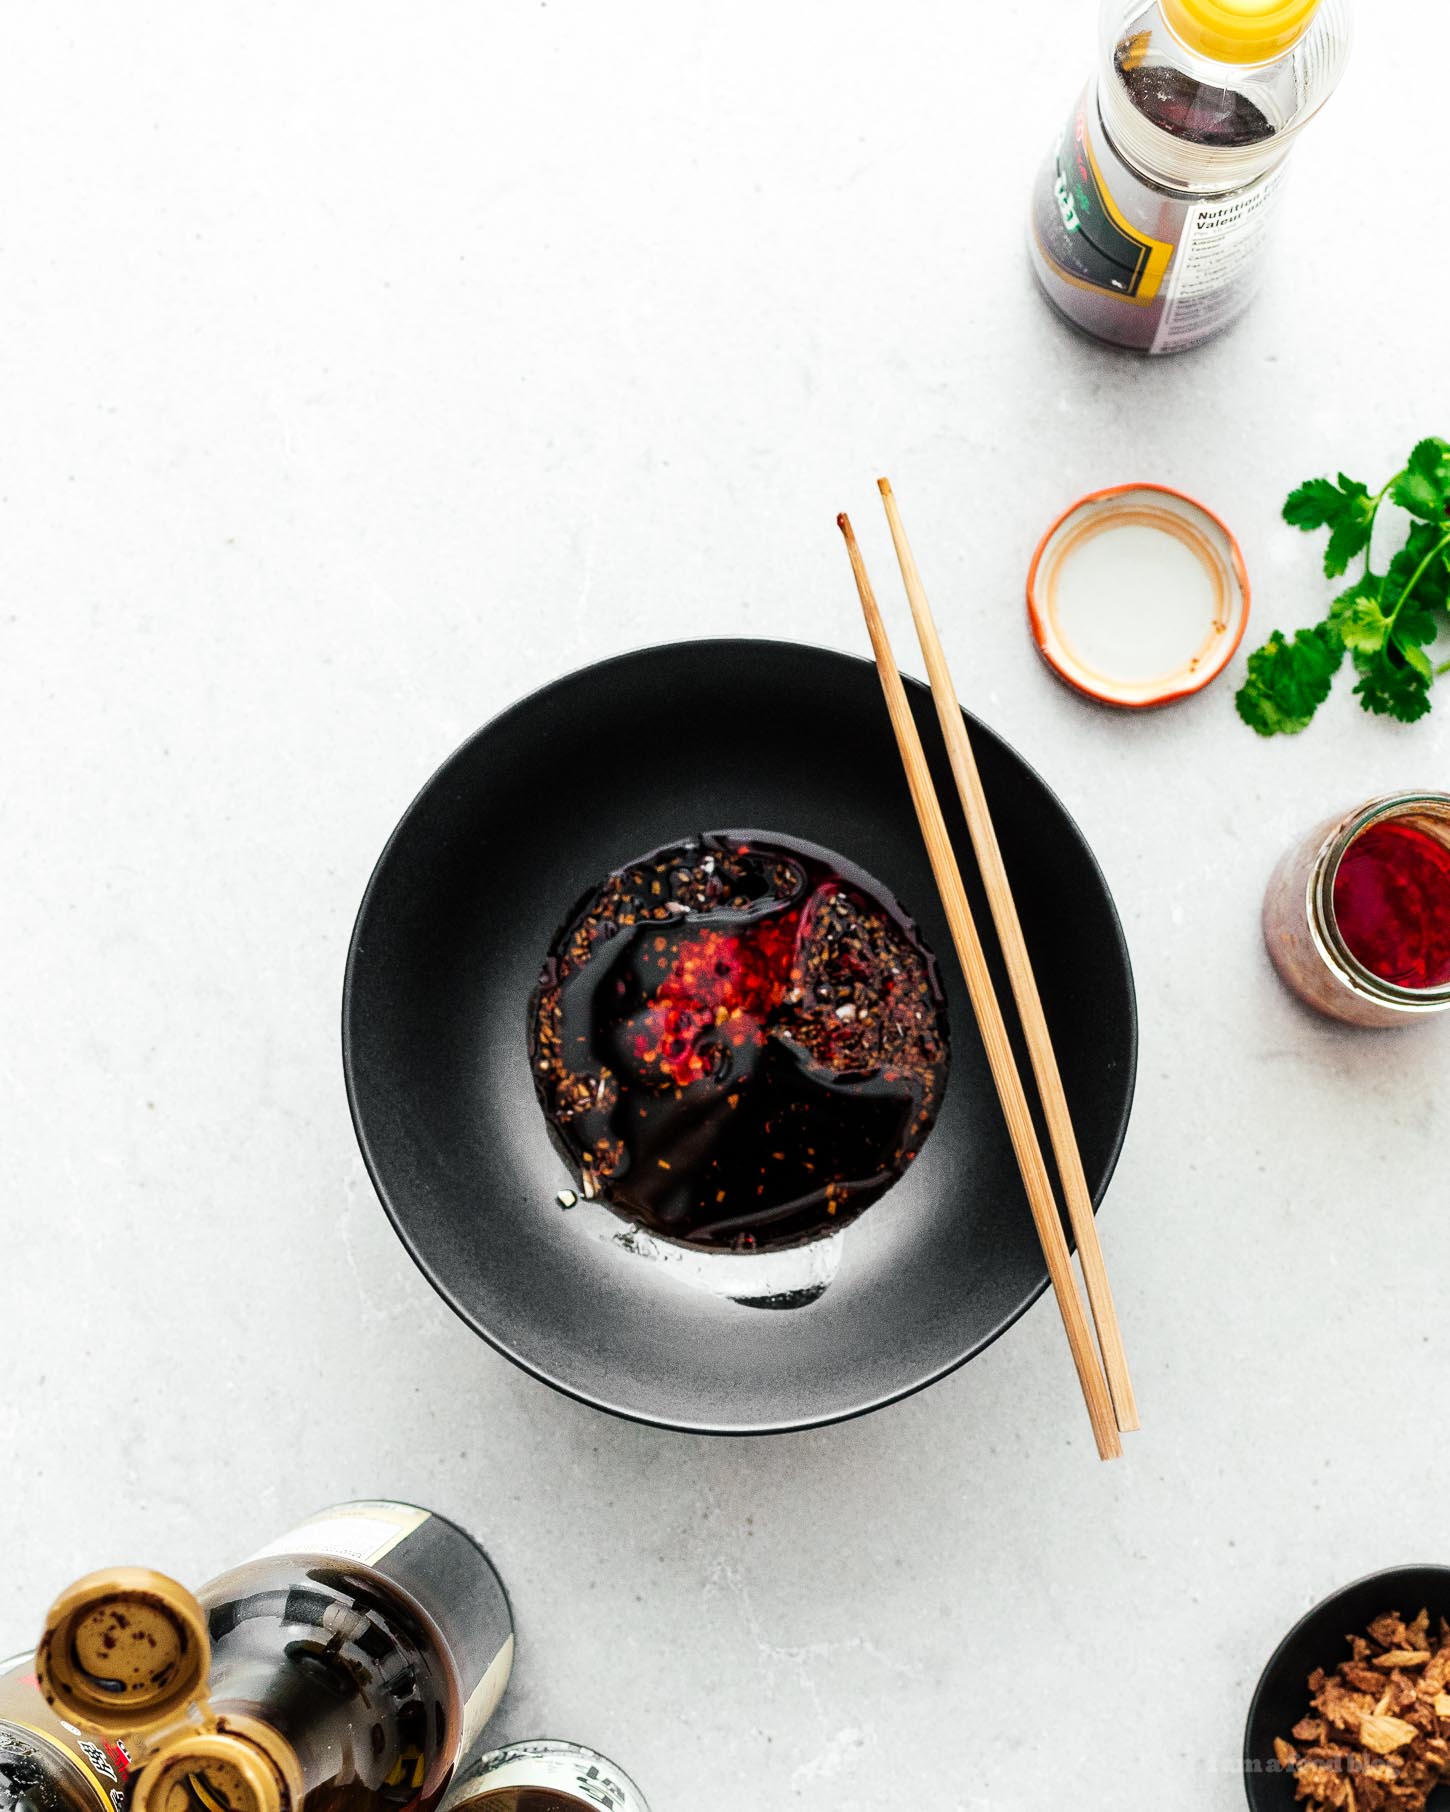 5 Minute Easy Weeknight Pantry Chili Noodles Recipe | www.iamafoodblog.com